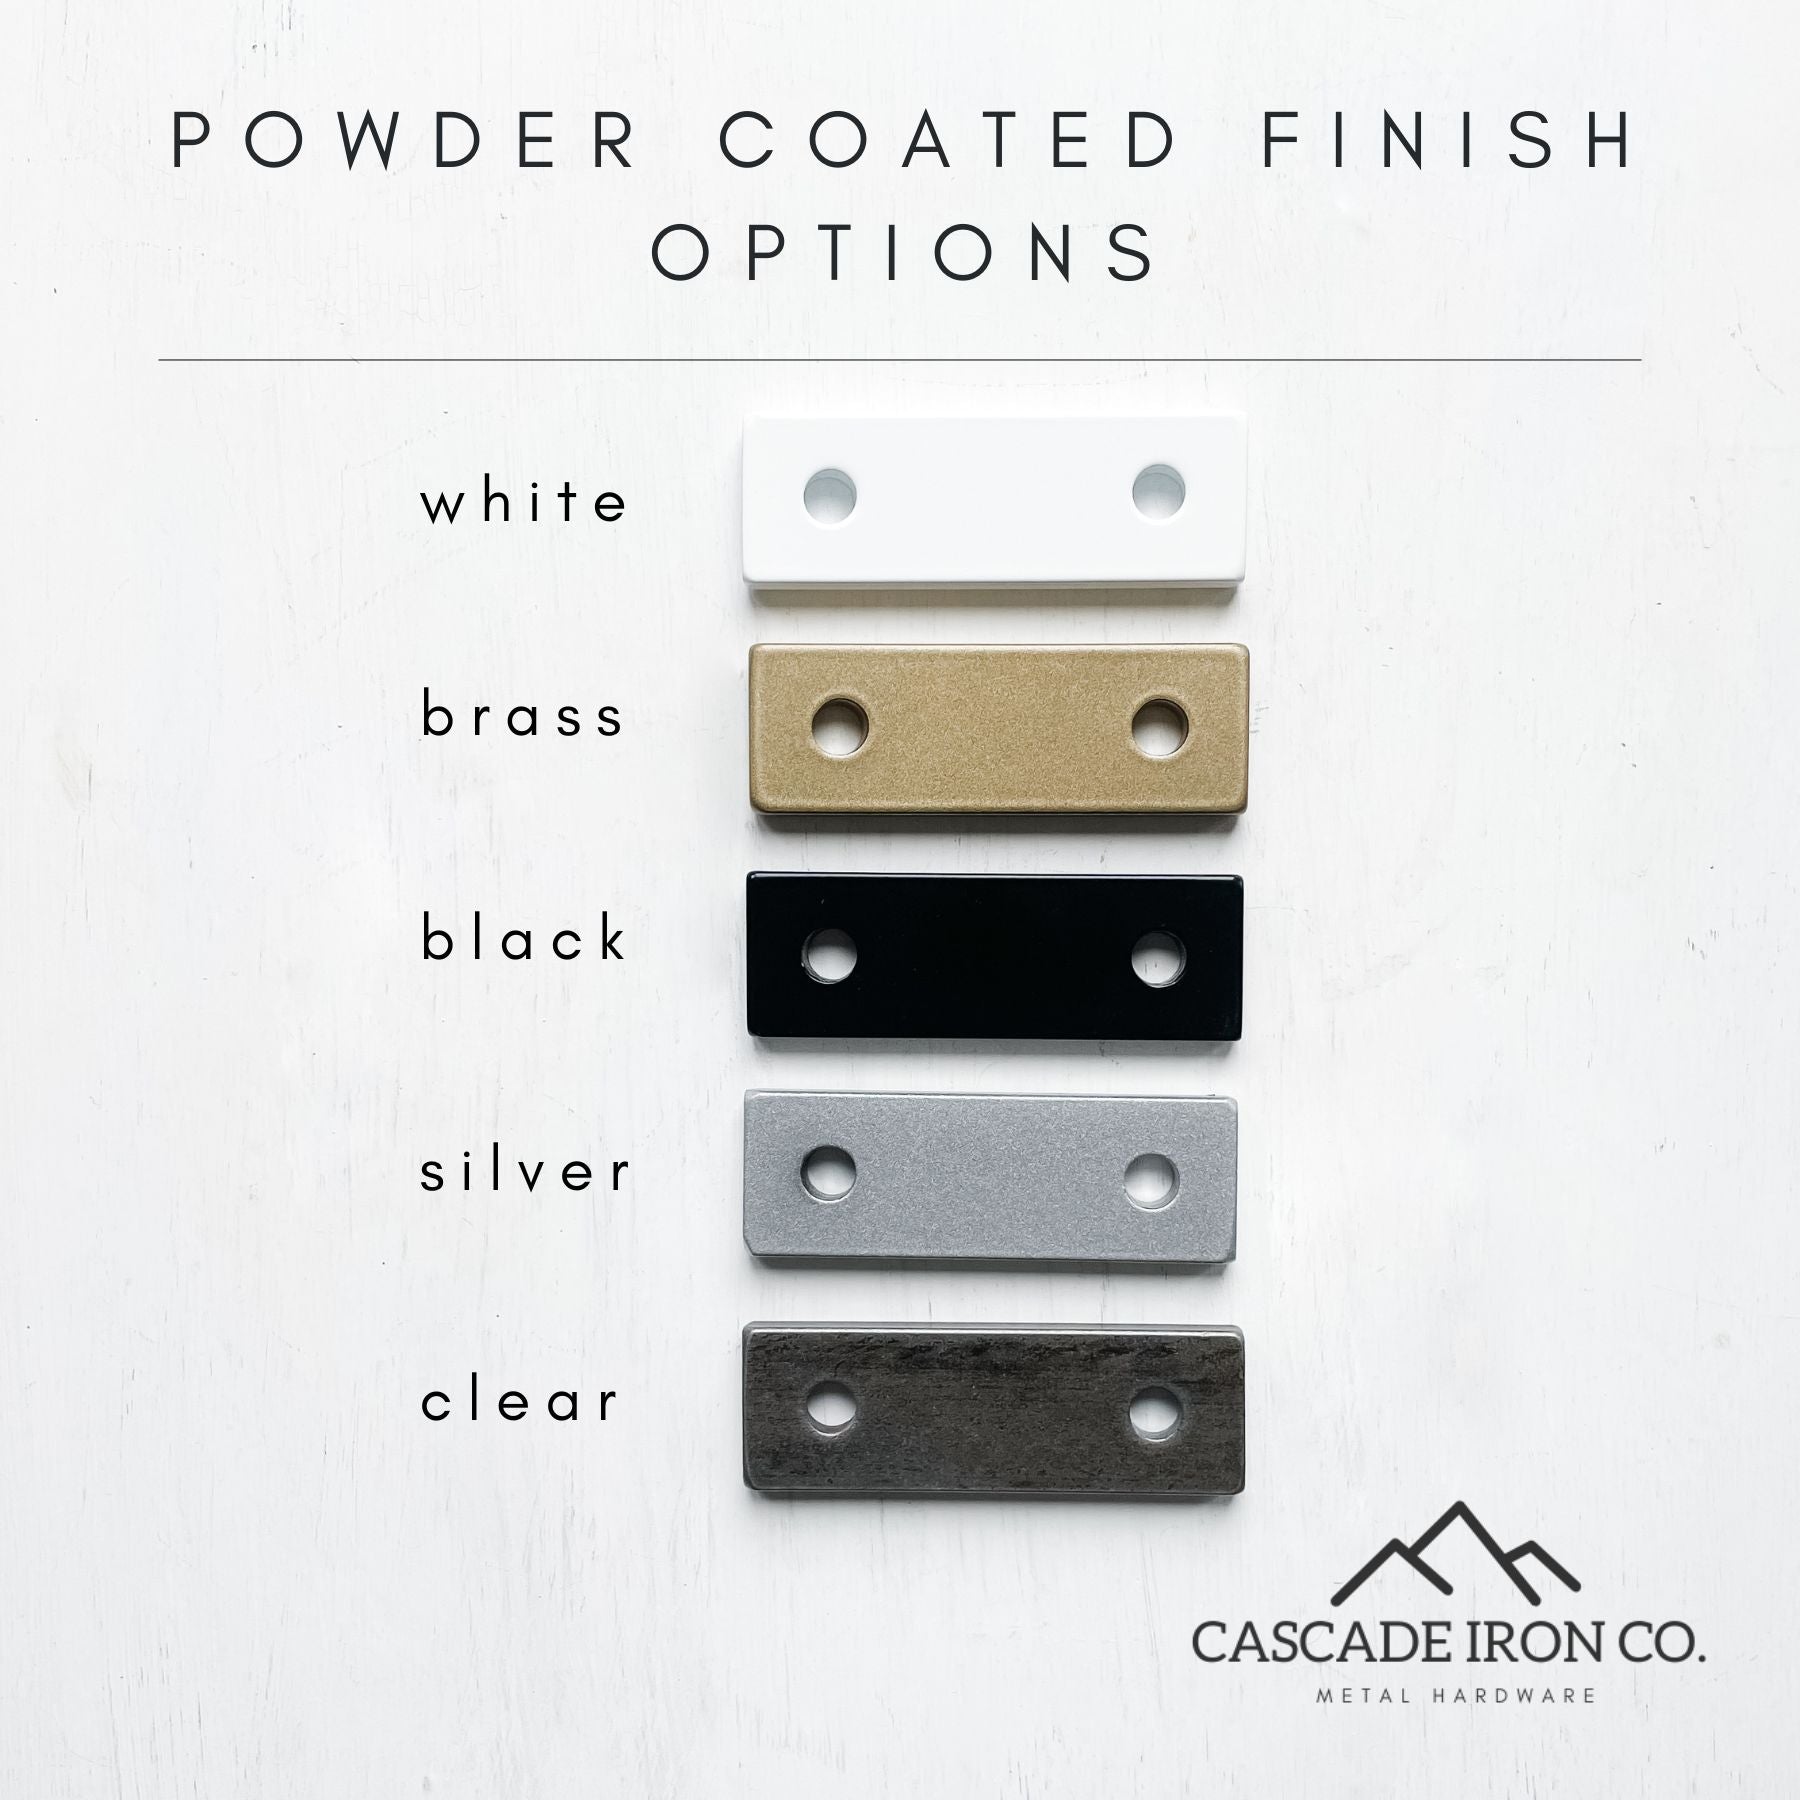 cascade iron co. finishes: white, brass, black, silver, clear coated steel